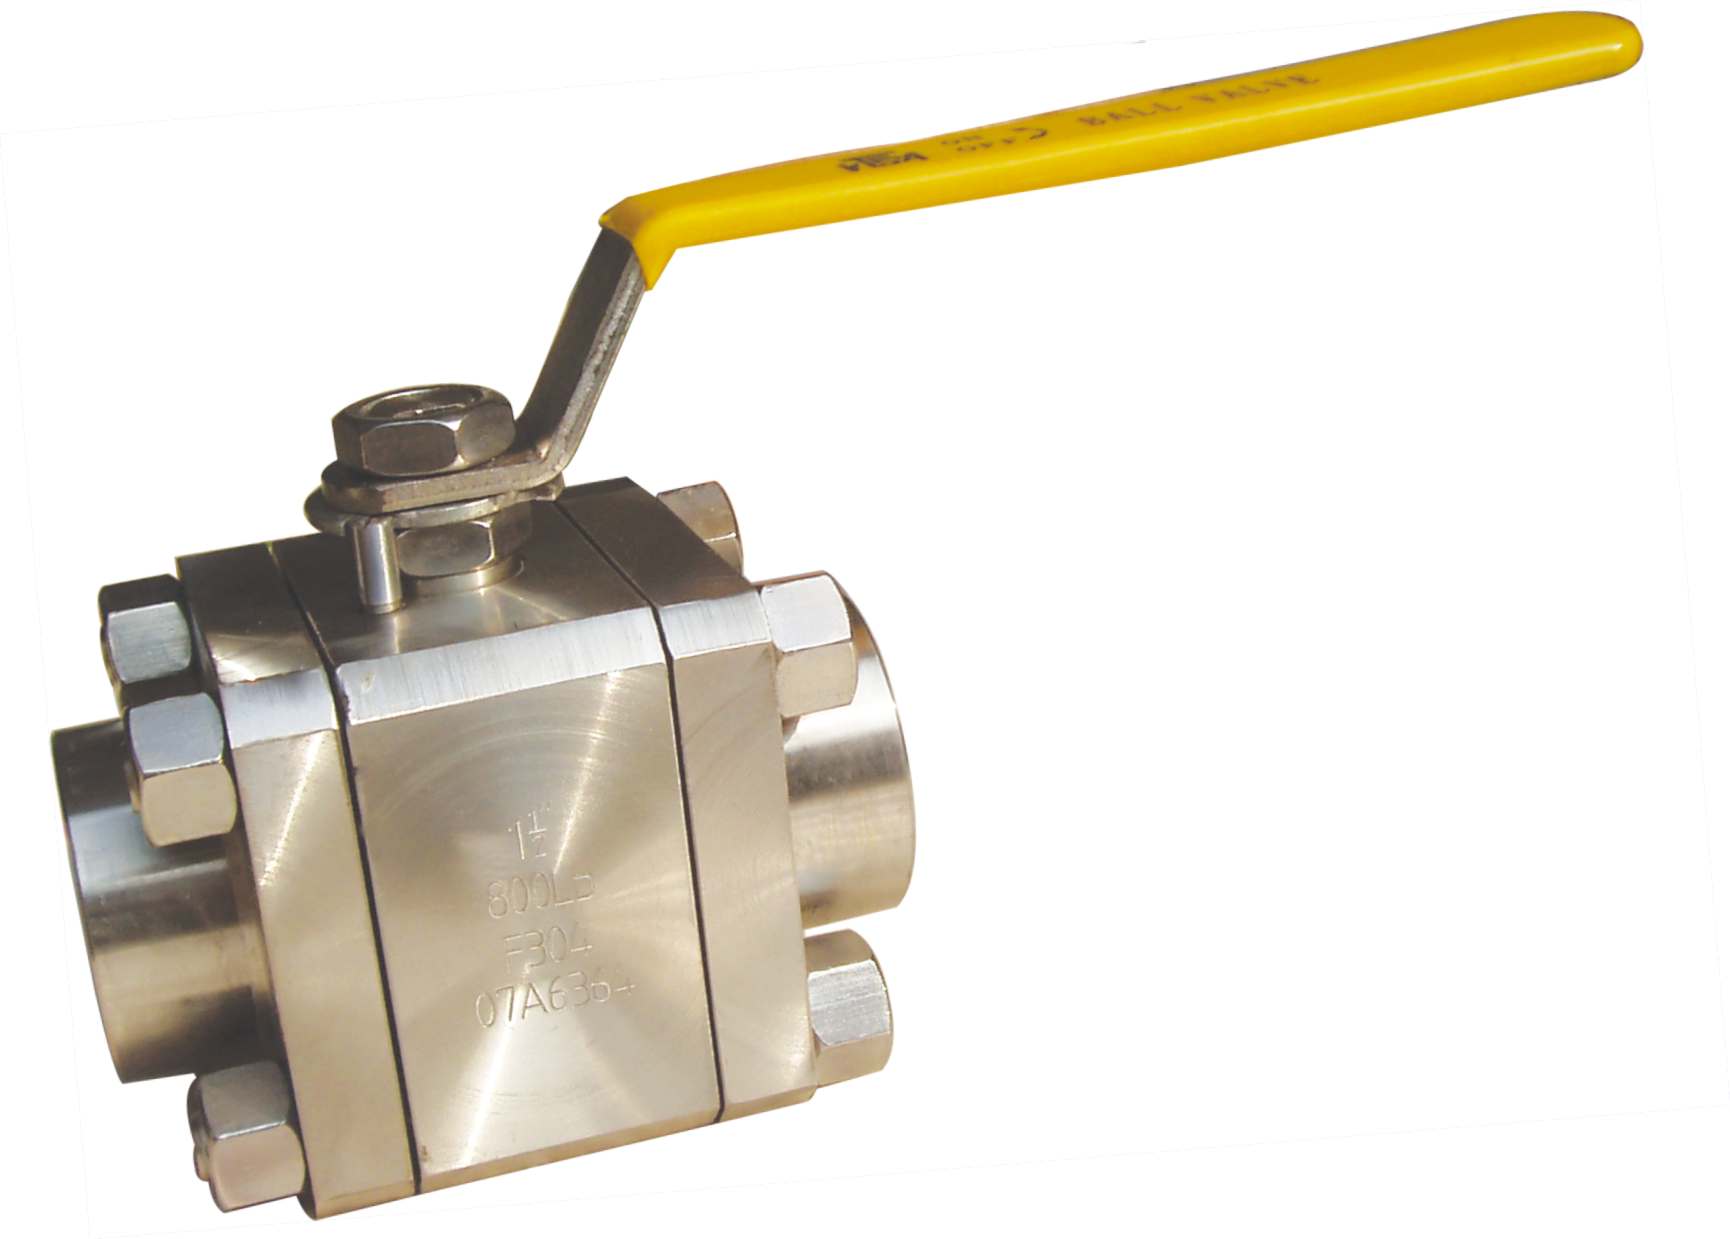 PN250 25Mpa Forged ball valve